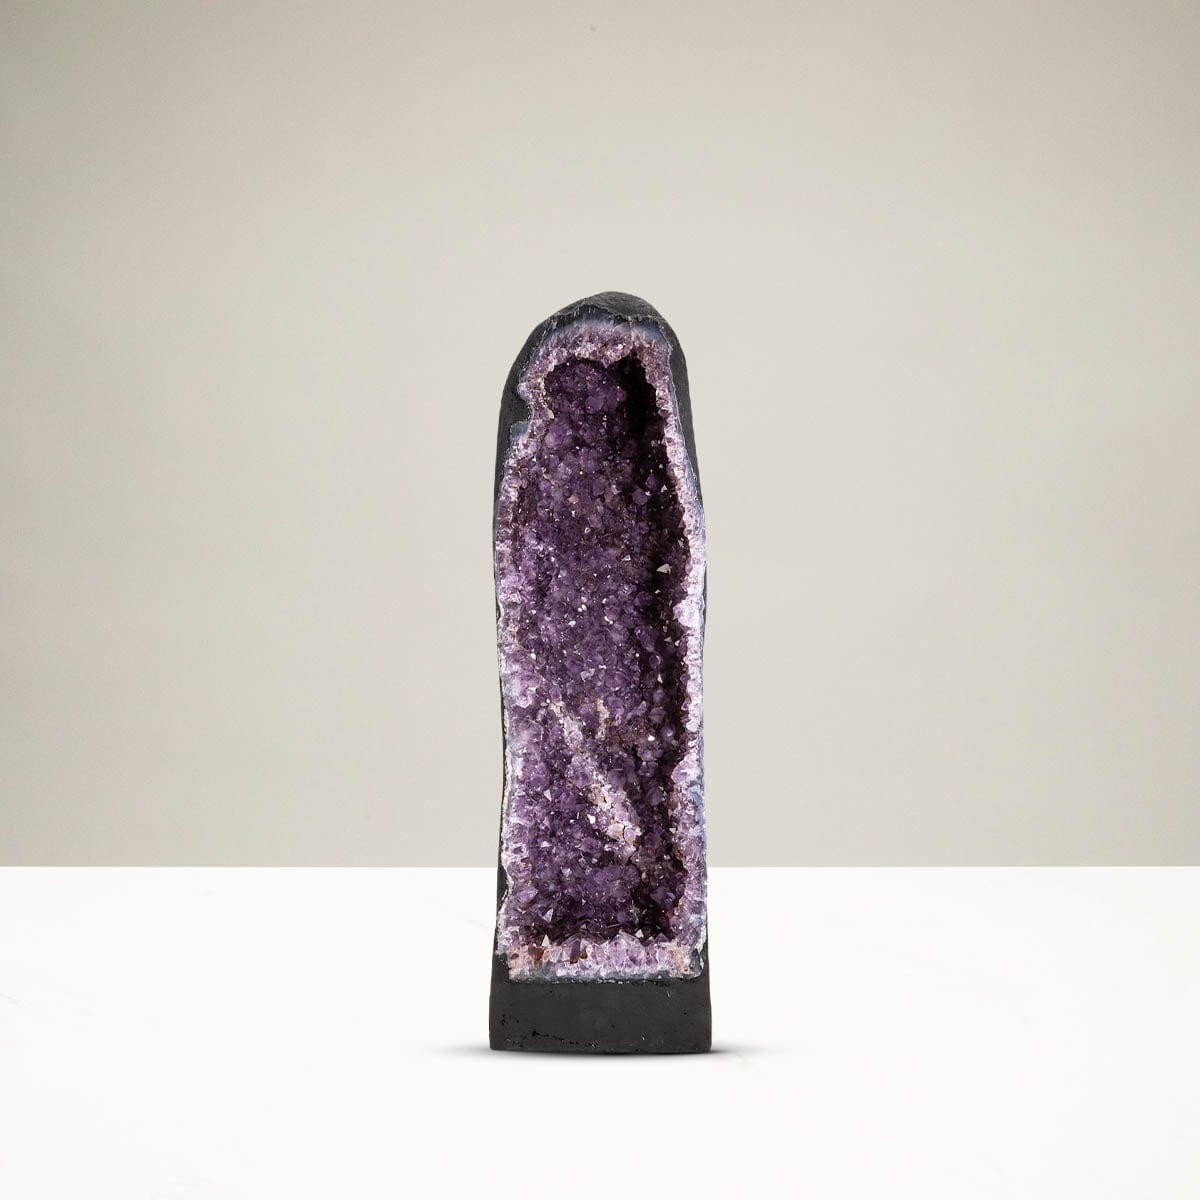 Kalifano Amethyst Natural Brazilian Amethyst Crystal Geode Cathedral - 25 in / 42 lbs BAG5800.001